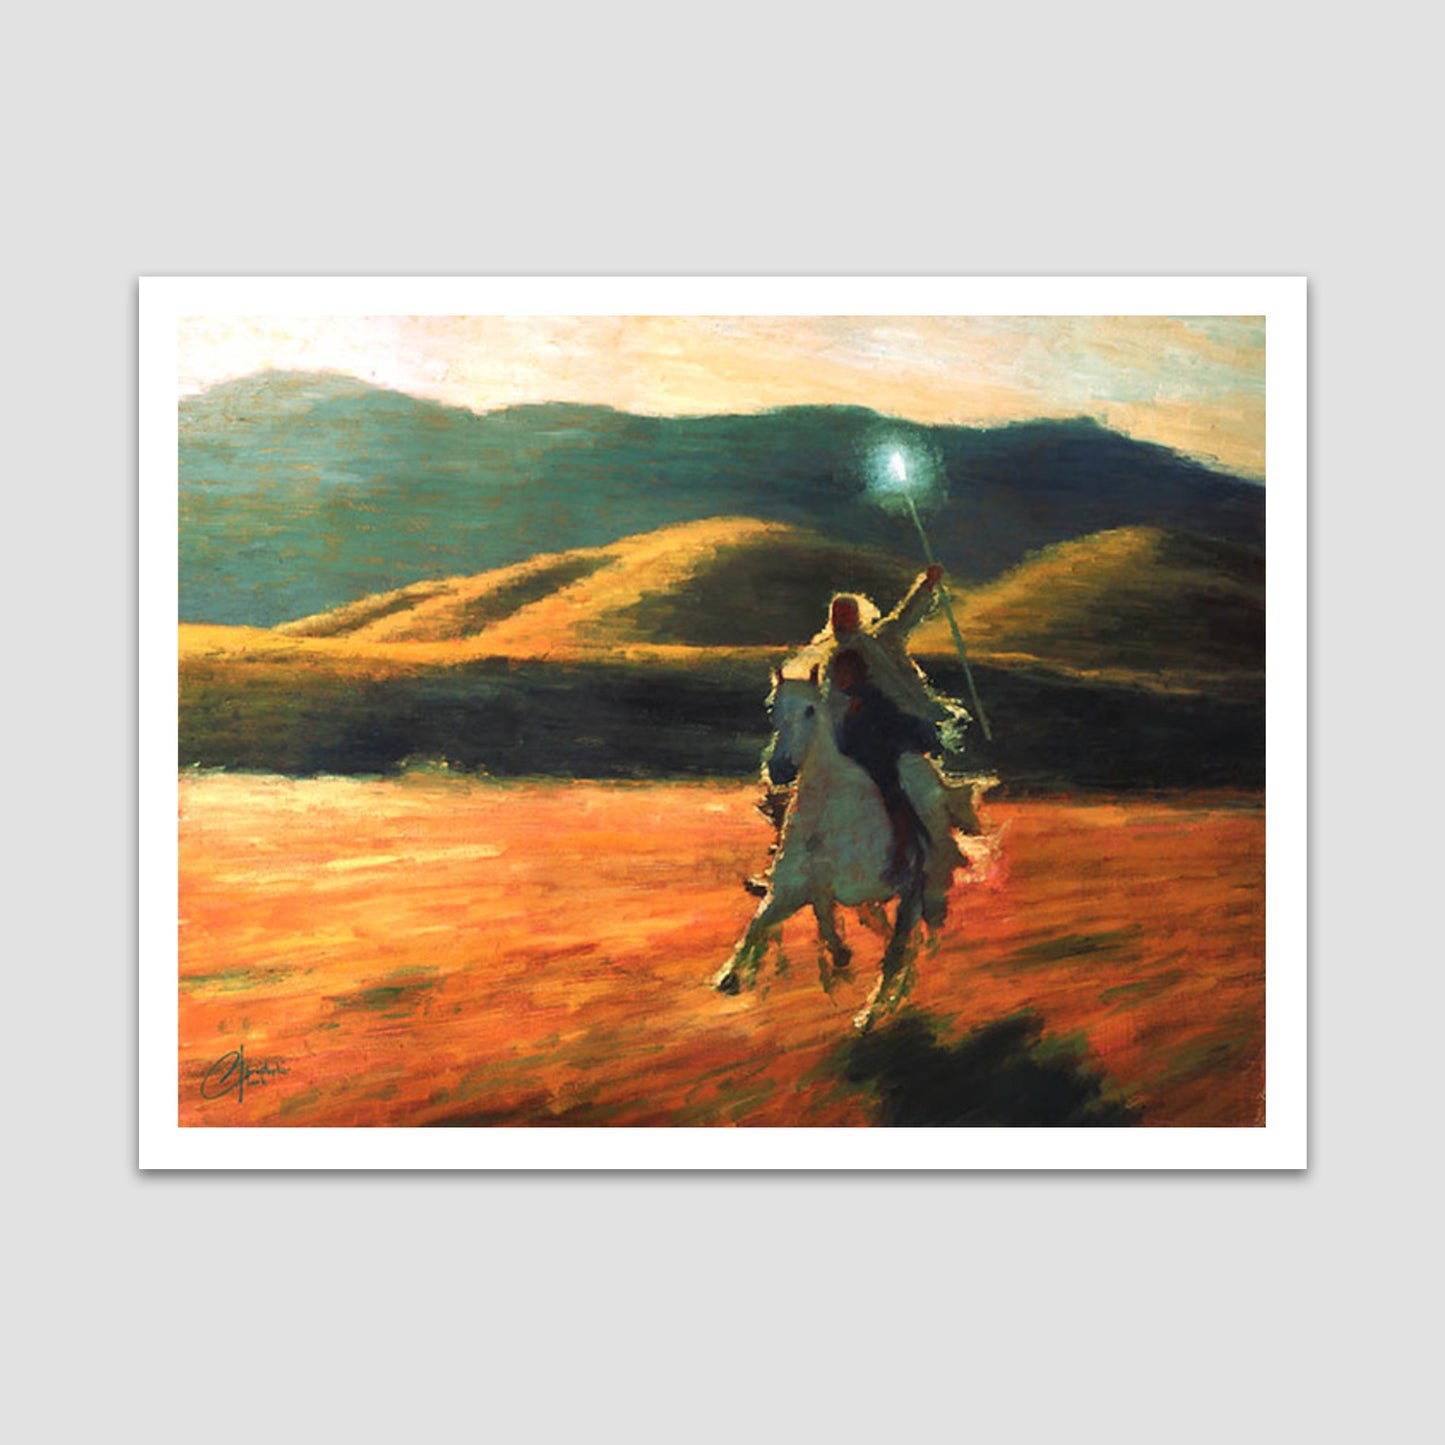 Gandalf, Pippin, and Shadowfax (The Lord of the Rings) Premium Art Print